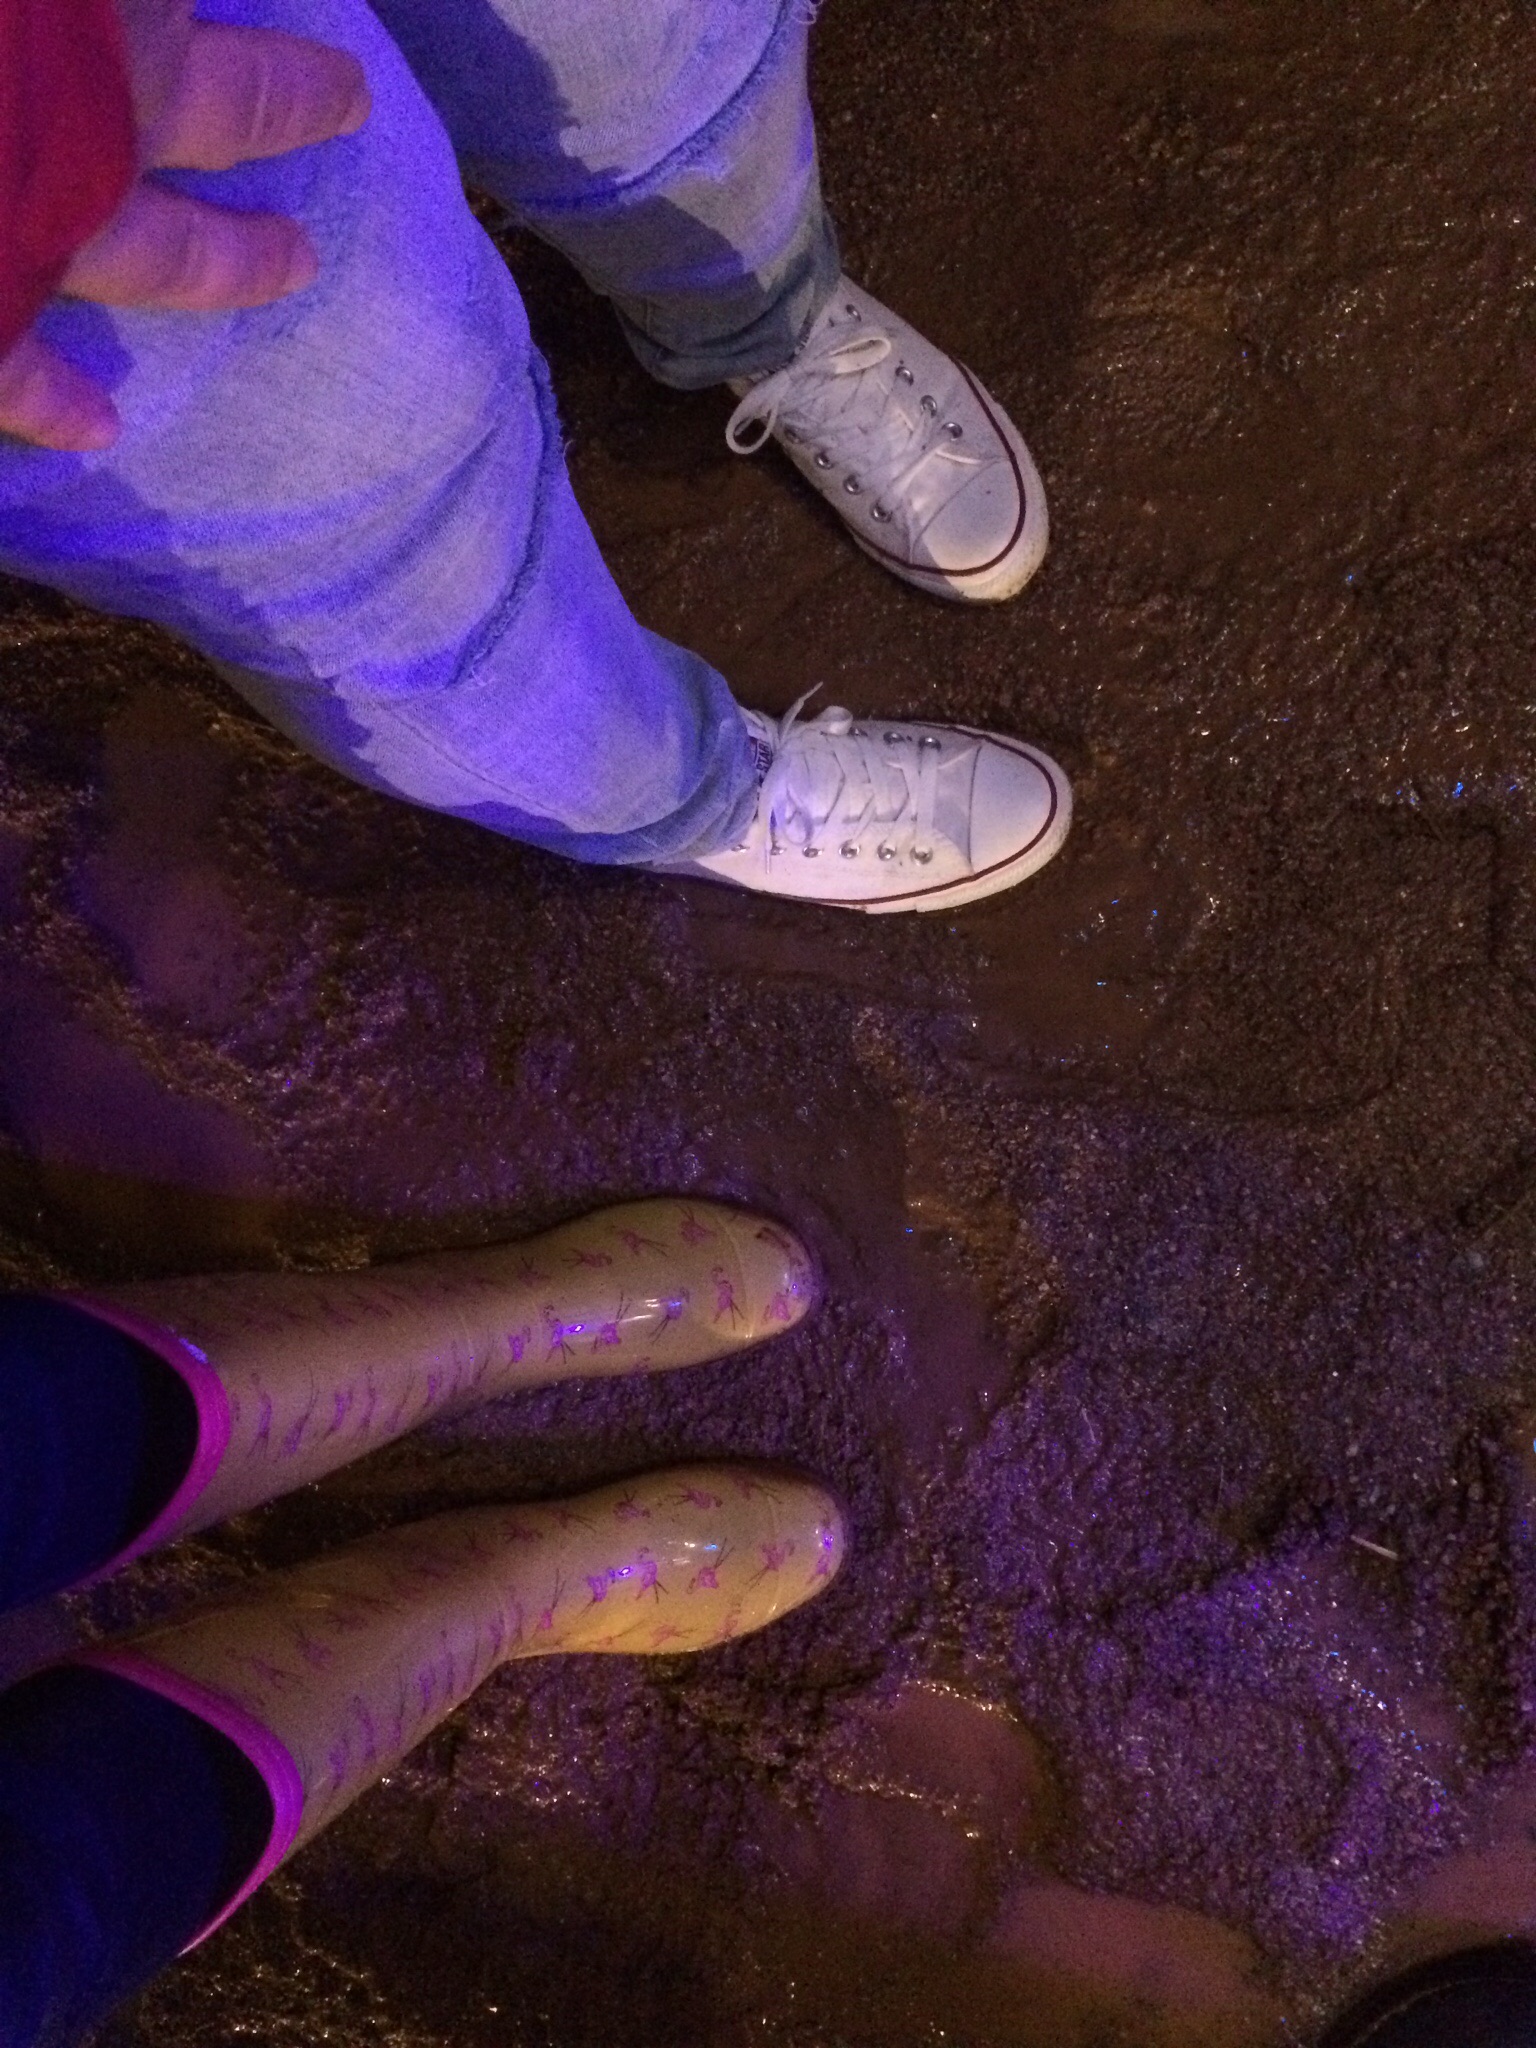 The mud we were standing in--at least I'm in rain boots!